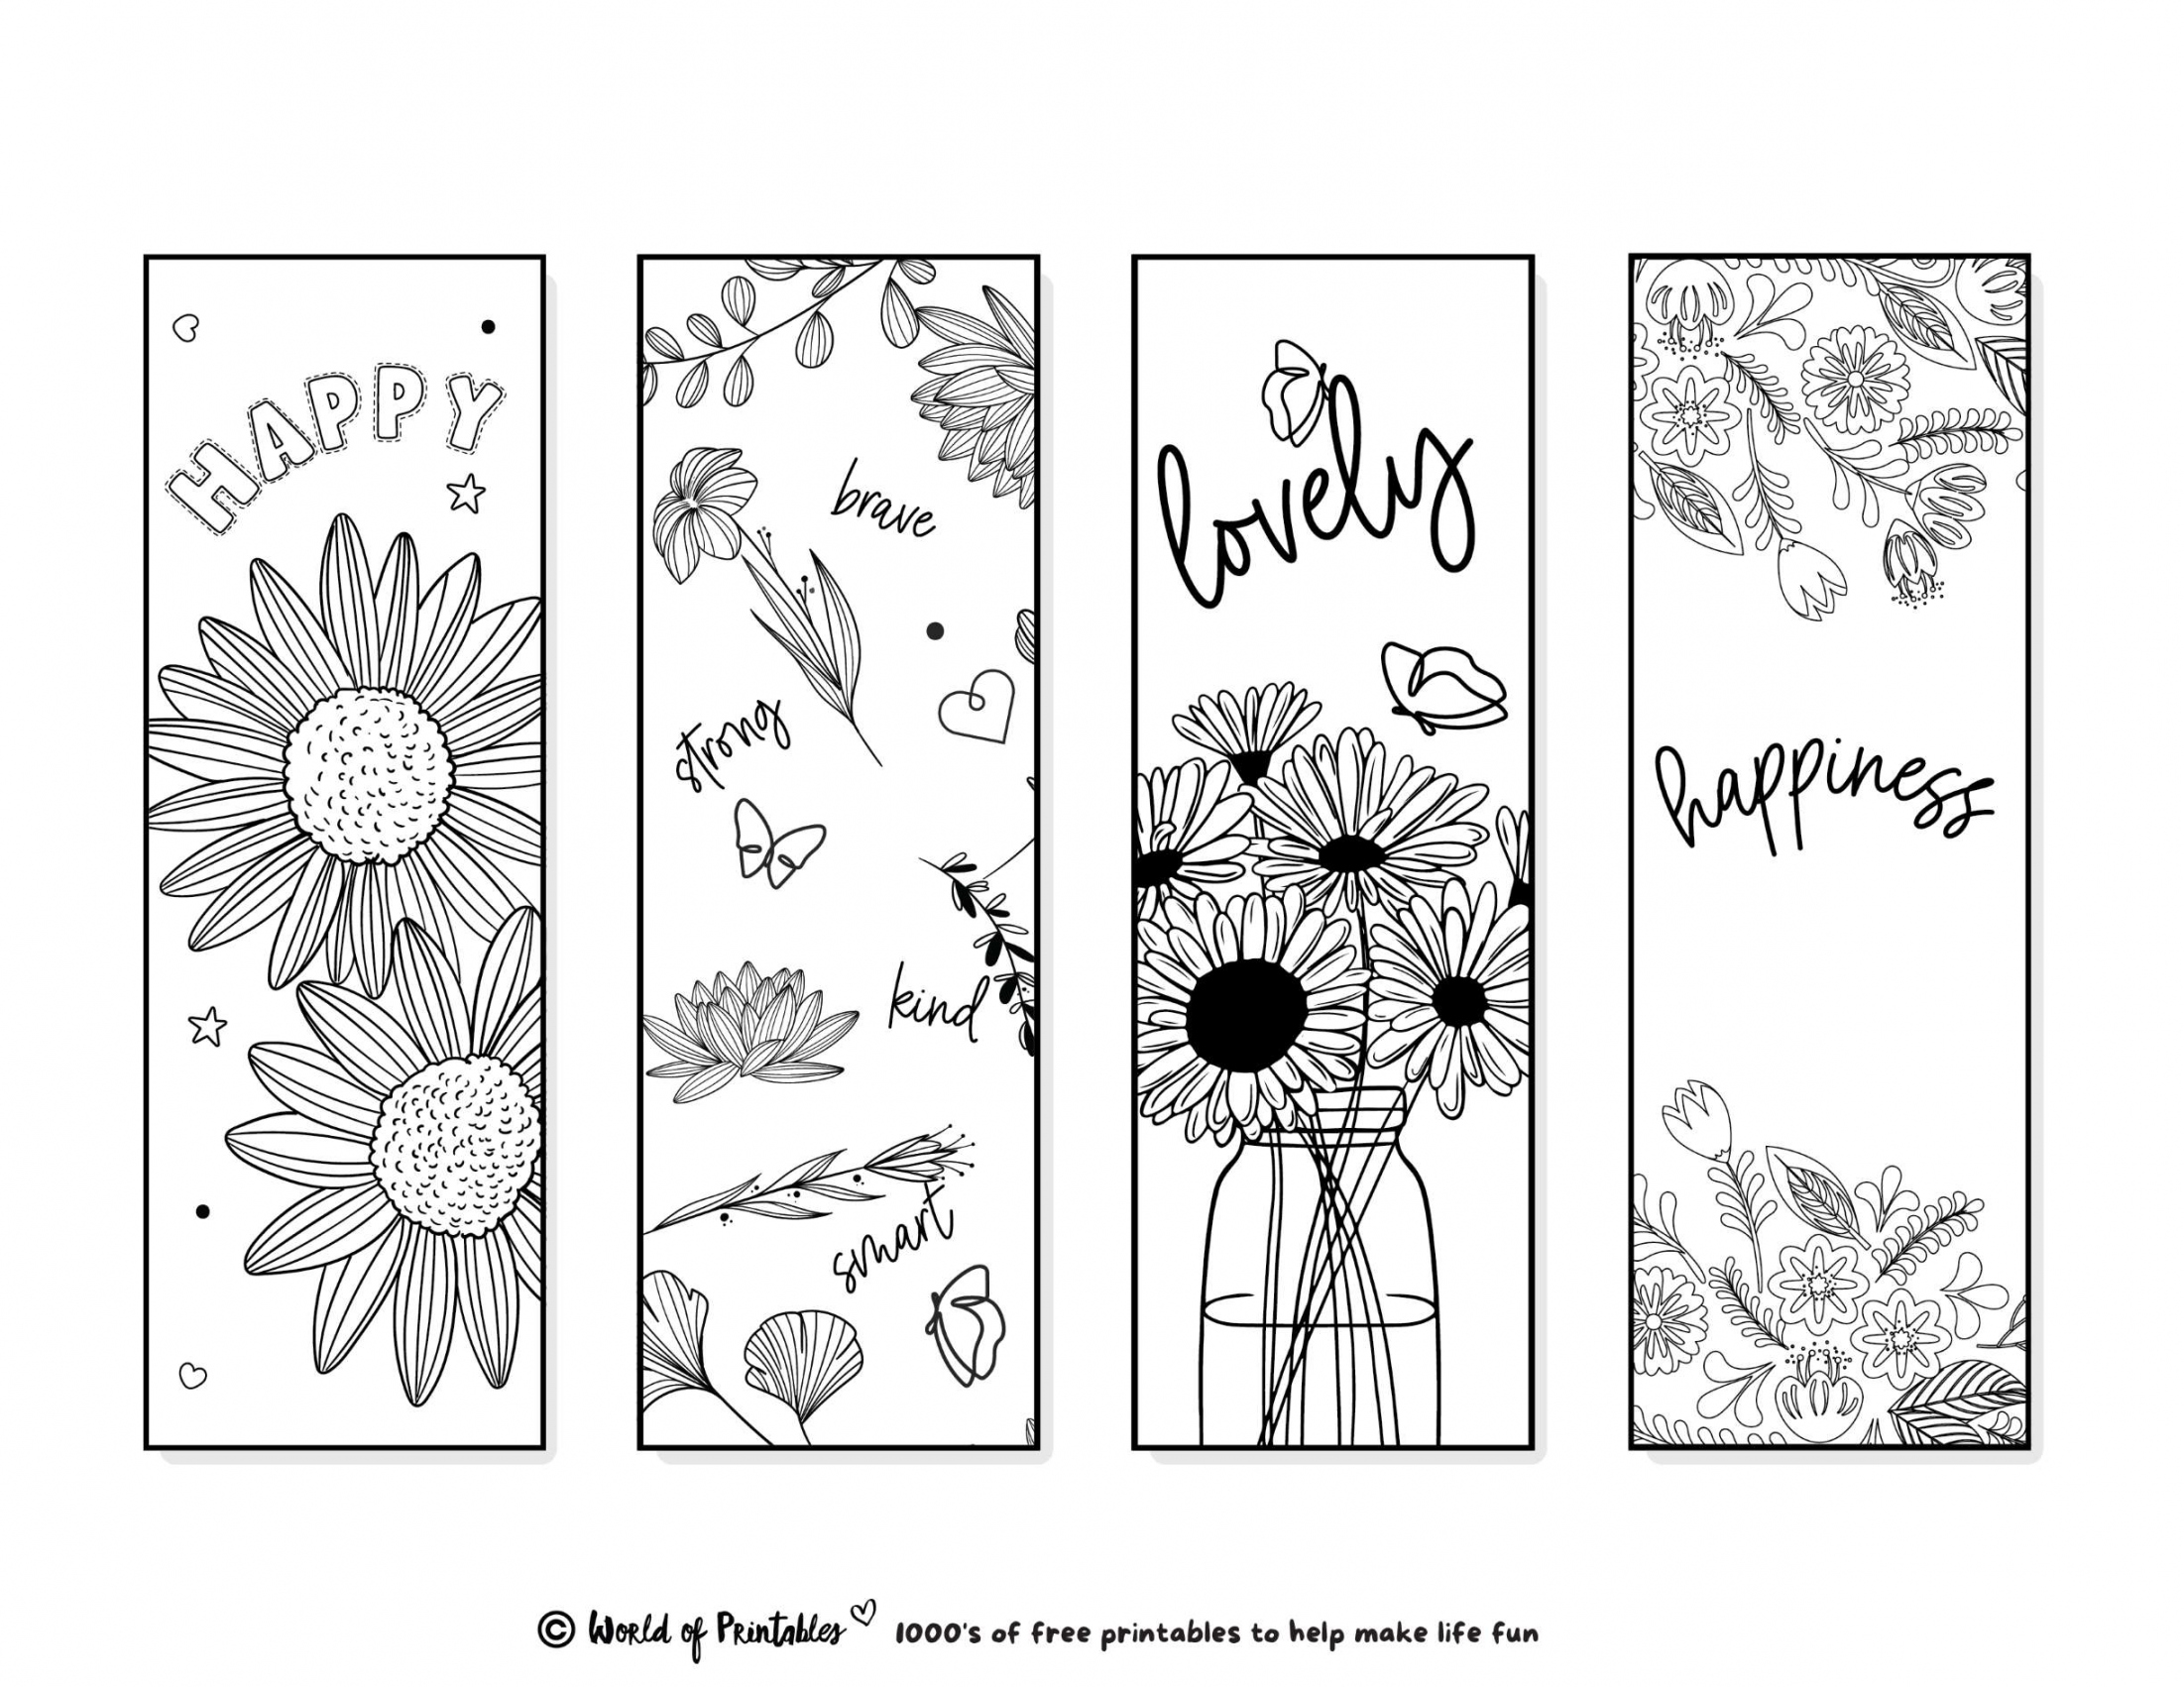 Printable Bookmarks To Color   For Adults & Kids - World of  - FREE Printables - Cute Free Printable Bookmarks To Color